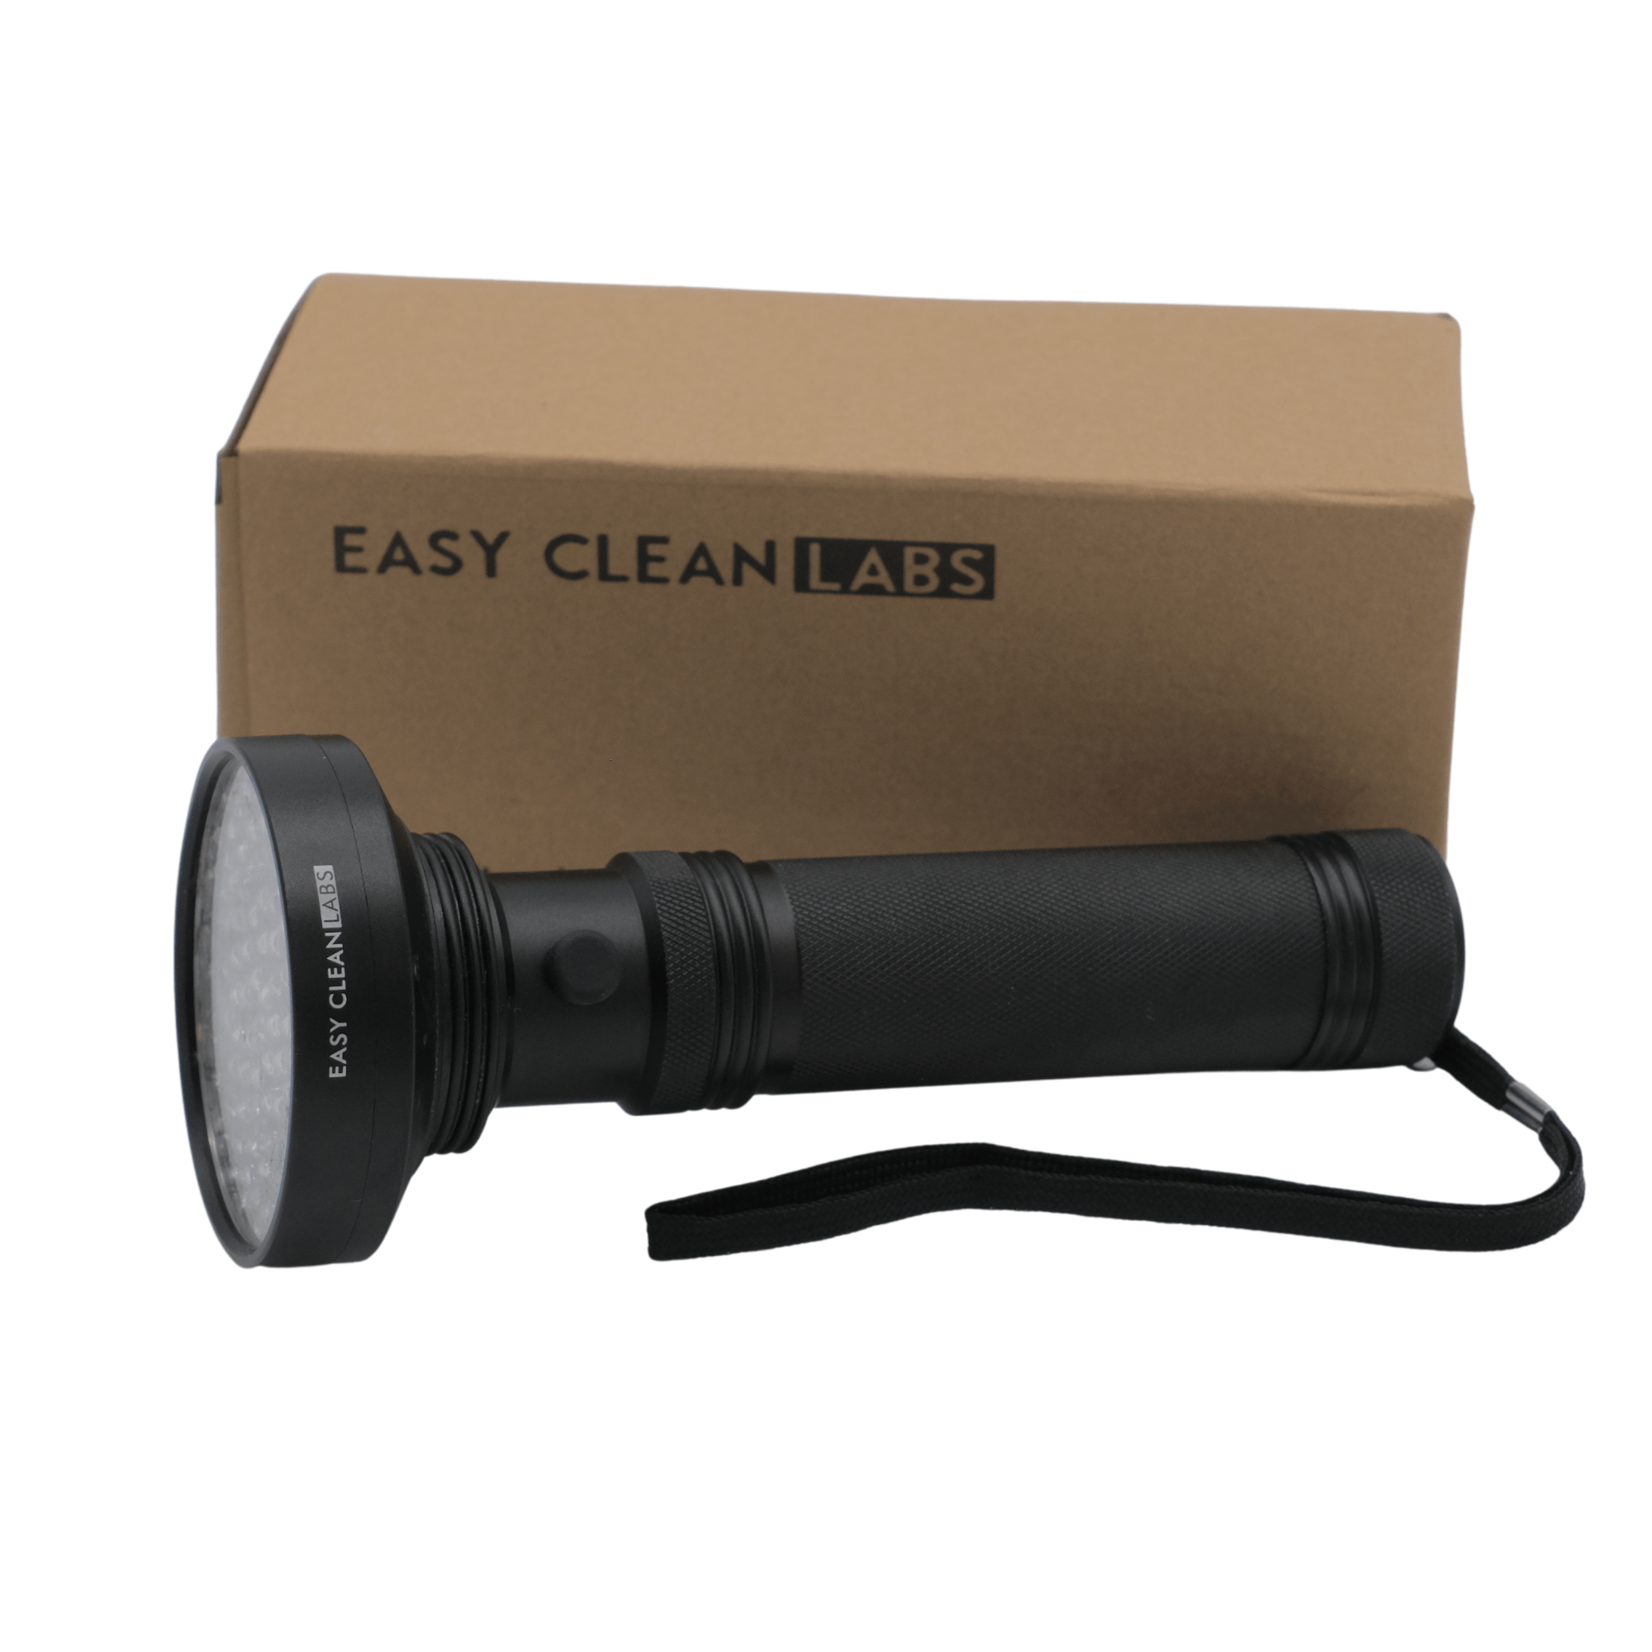 EASY CLEAN LABS Easy Clean Labs UV 100 LED Detection Flashlight